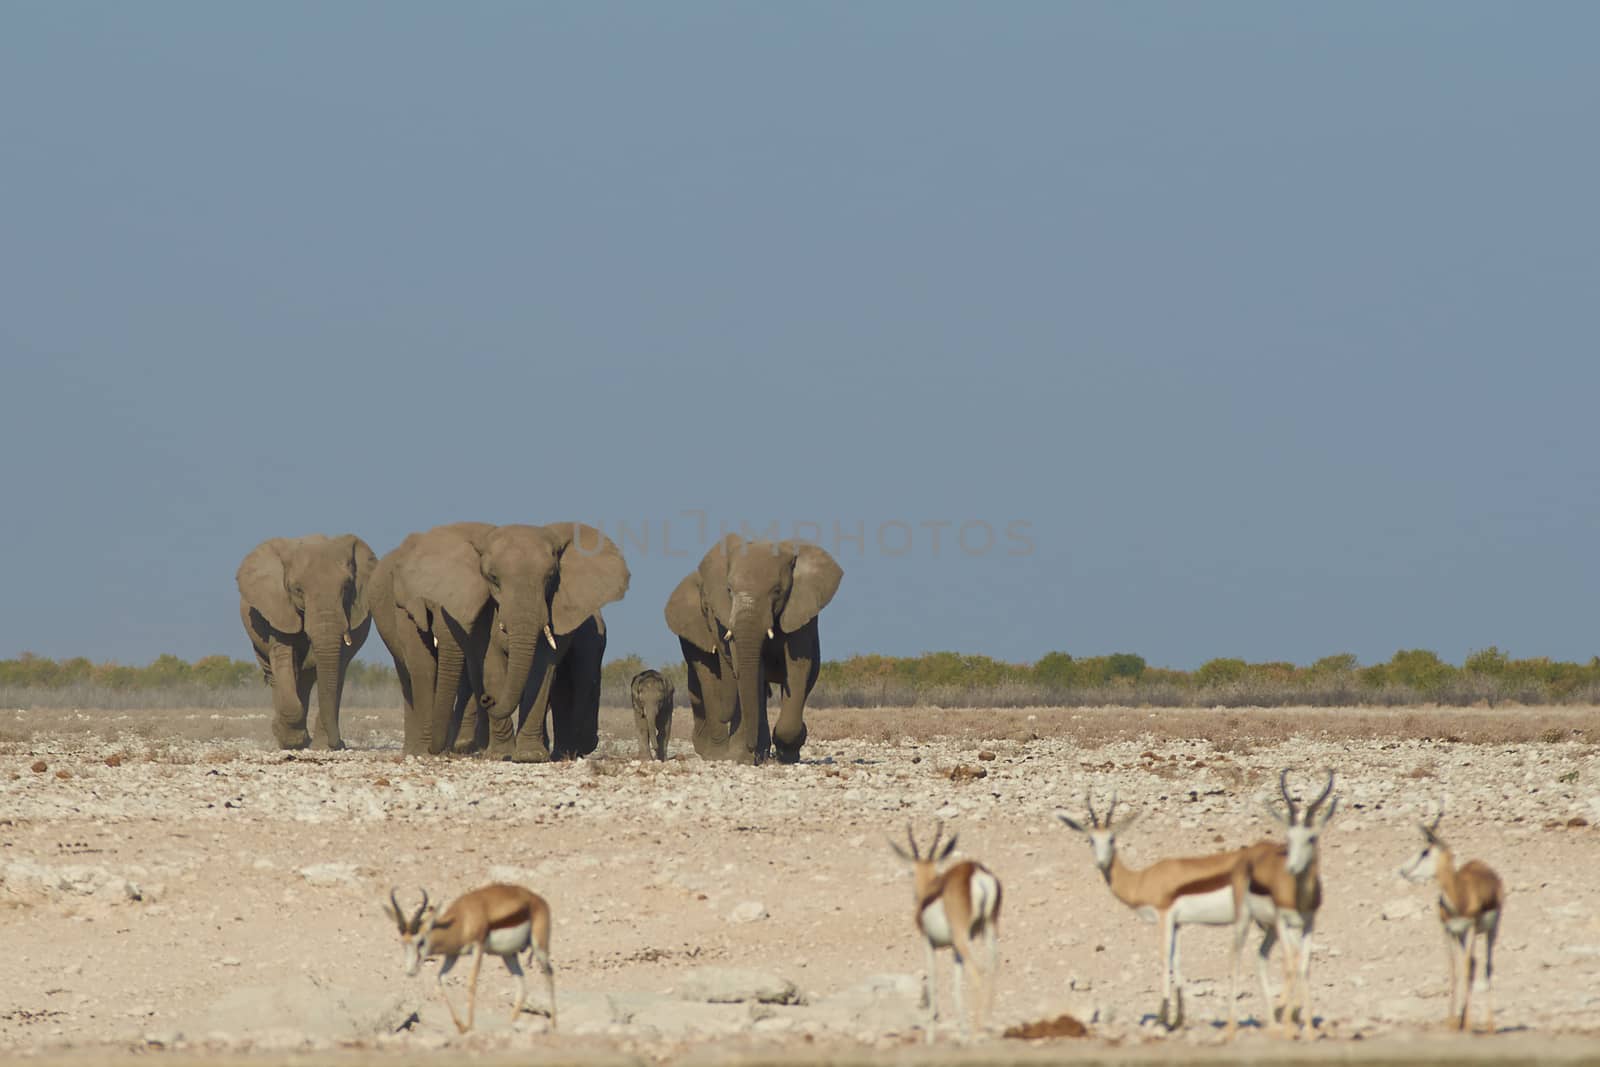 Group of African Elephants (Loxodonta africana) walking quickly and in a tight group as they head for a waterhole in Etosha National Park, Namibia